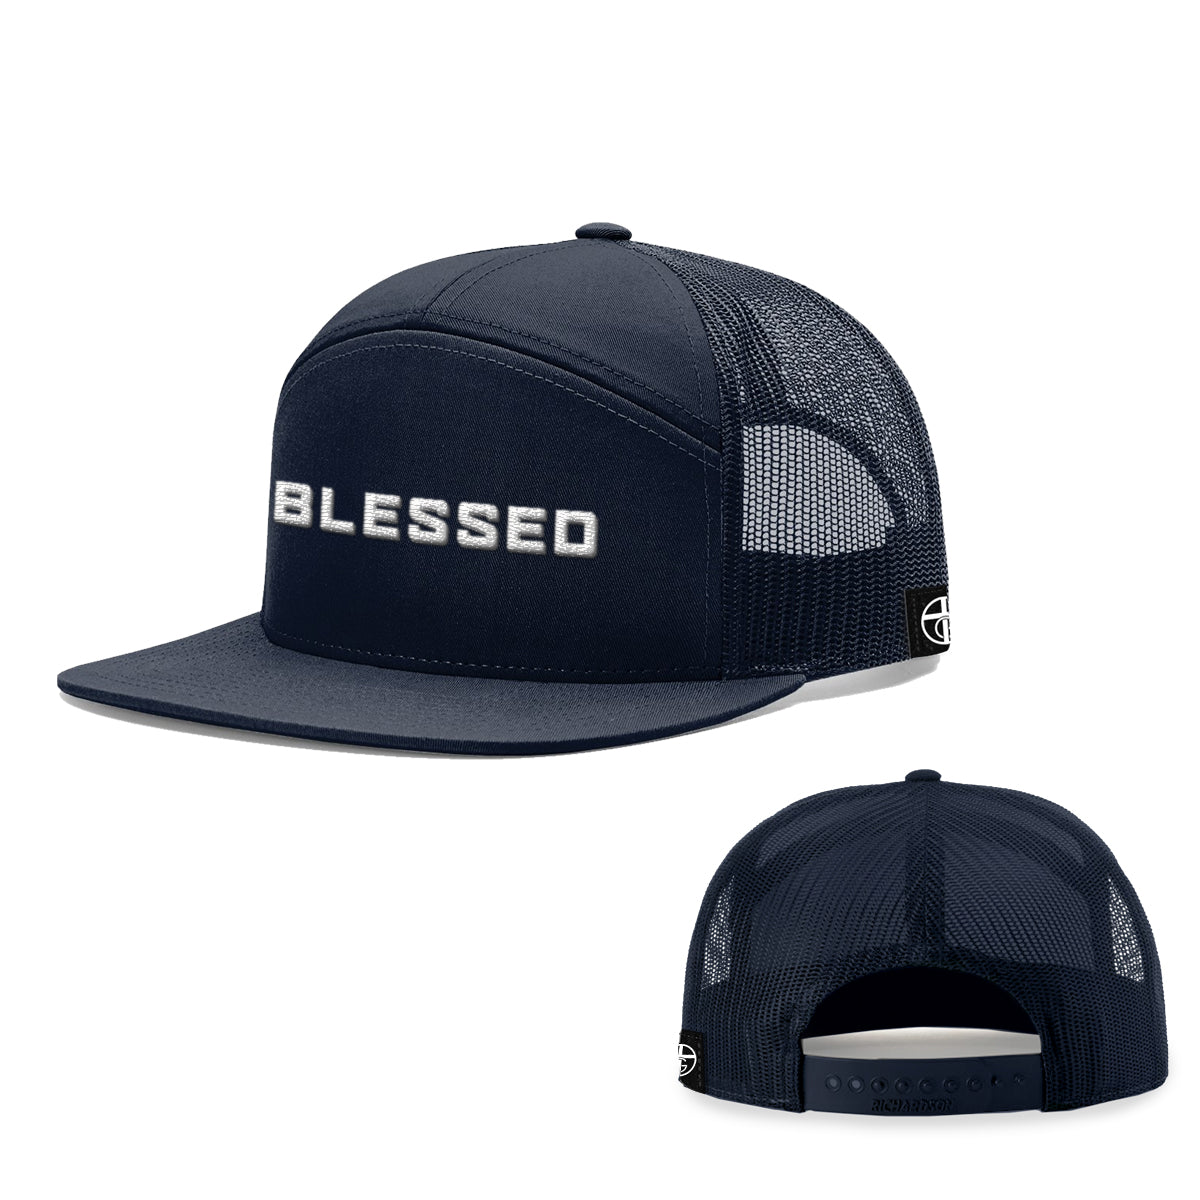 Blessed 7 Panel Hats